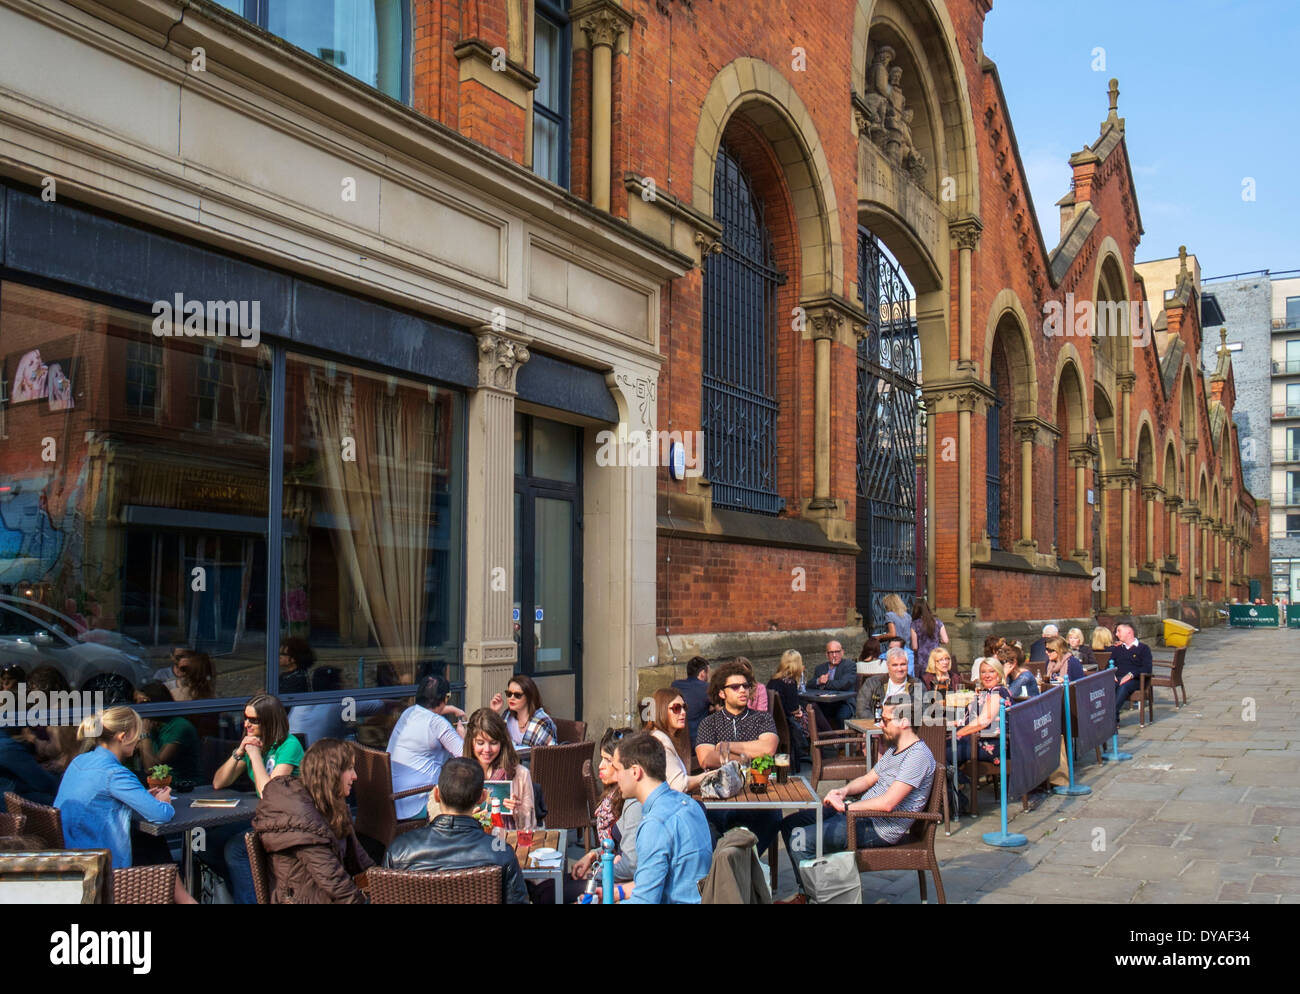 Pavement cafe by the old Wholesale Fish Markets building on High Street, Northern Quarter, Manchester, England, UK Stock Photo